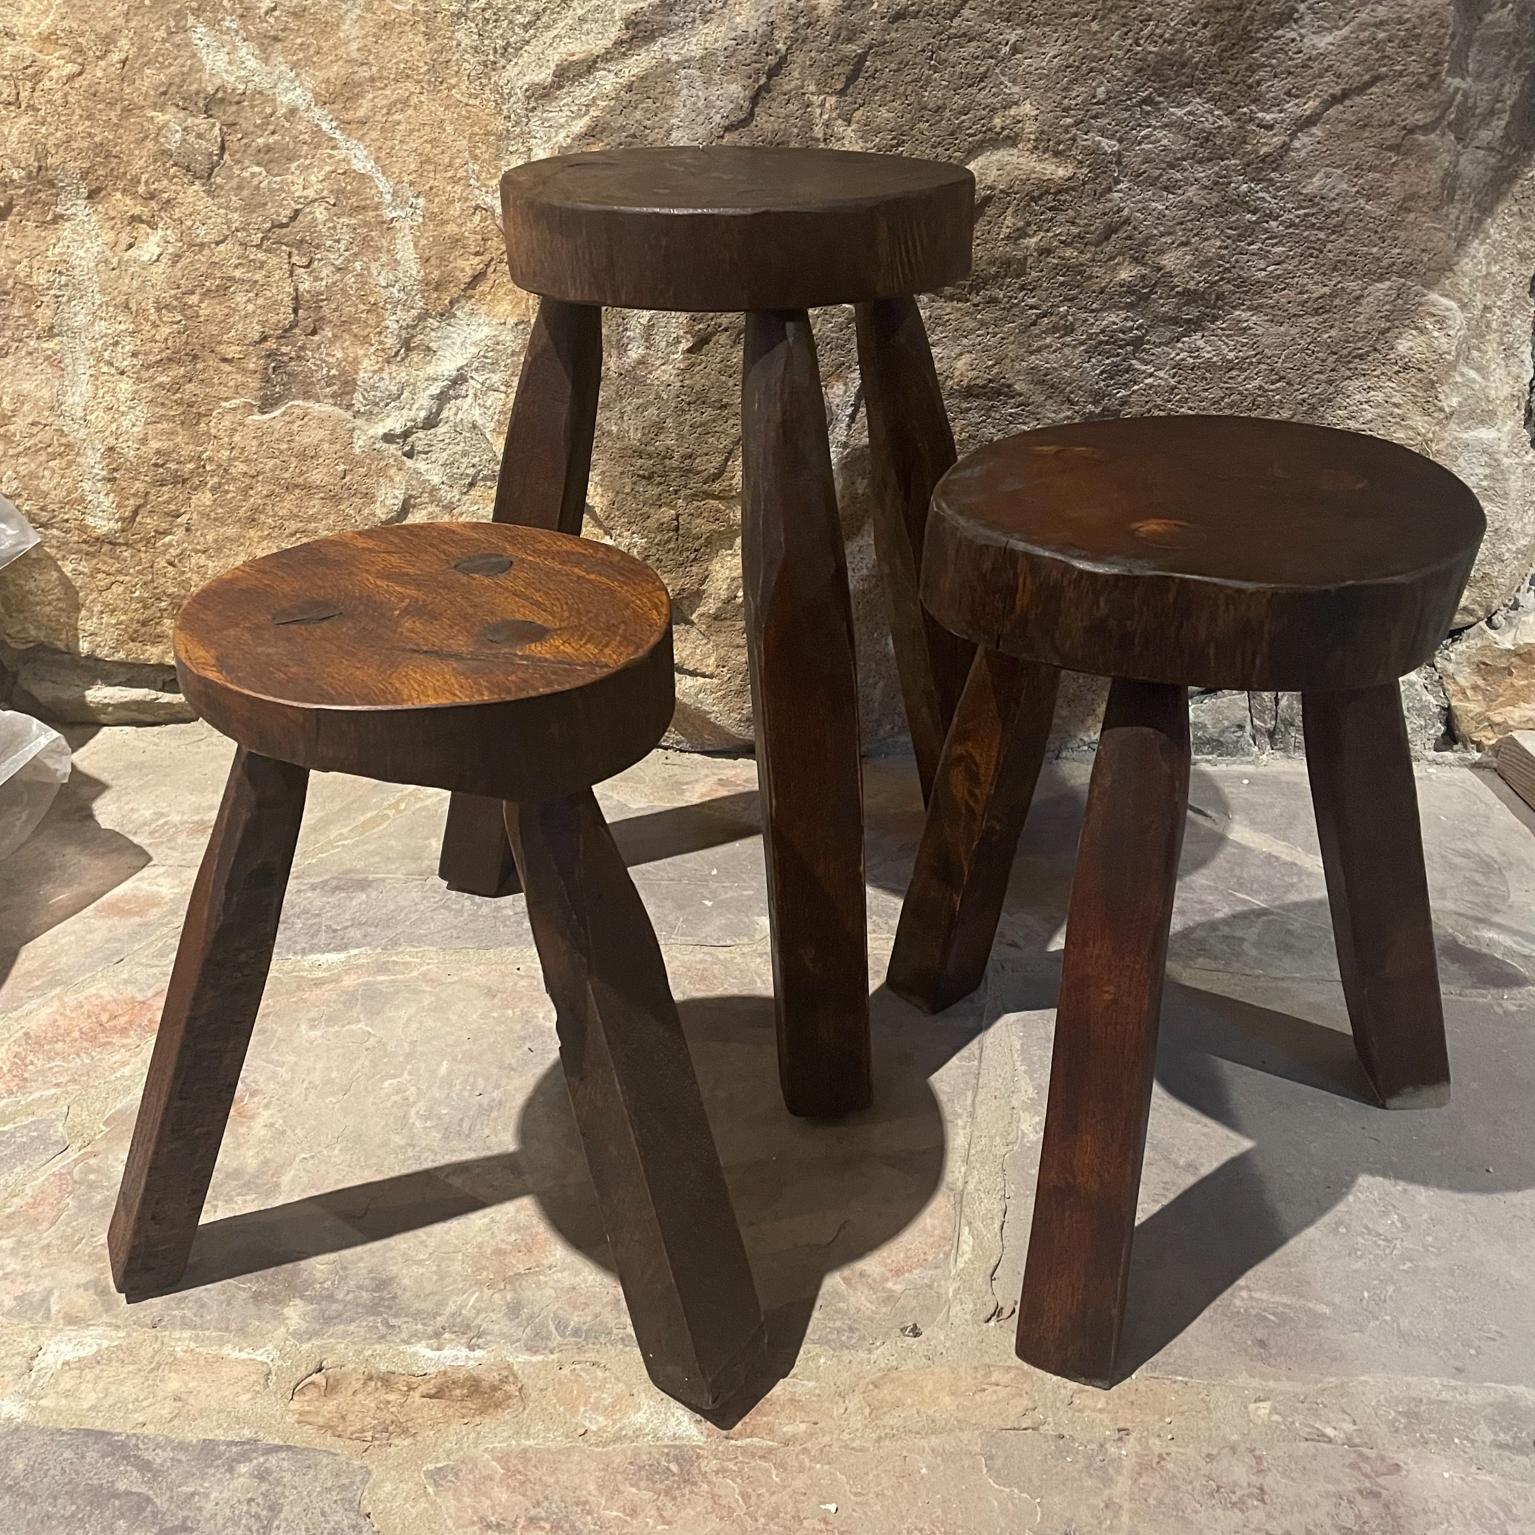 Vintage Set of 3 Rustic Milking Stools
Carved Solid Wood Three-Legged tripod in the style of Pierre Jeanneret
Unmarked. 
Three different sizes.
1) 18.5 H x 16 D 10 D top 2) 14.38 H 14 D x 9.5 D top 3) 13.63 H 13 D 8 D top
Original vintage preowned